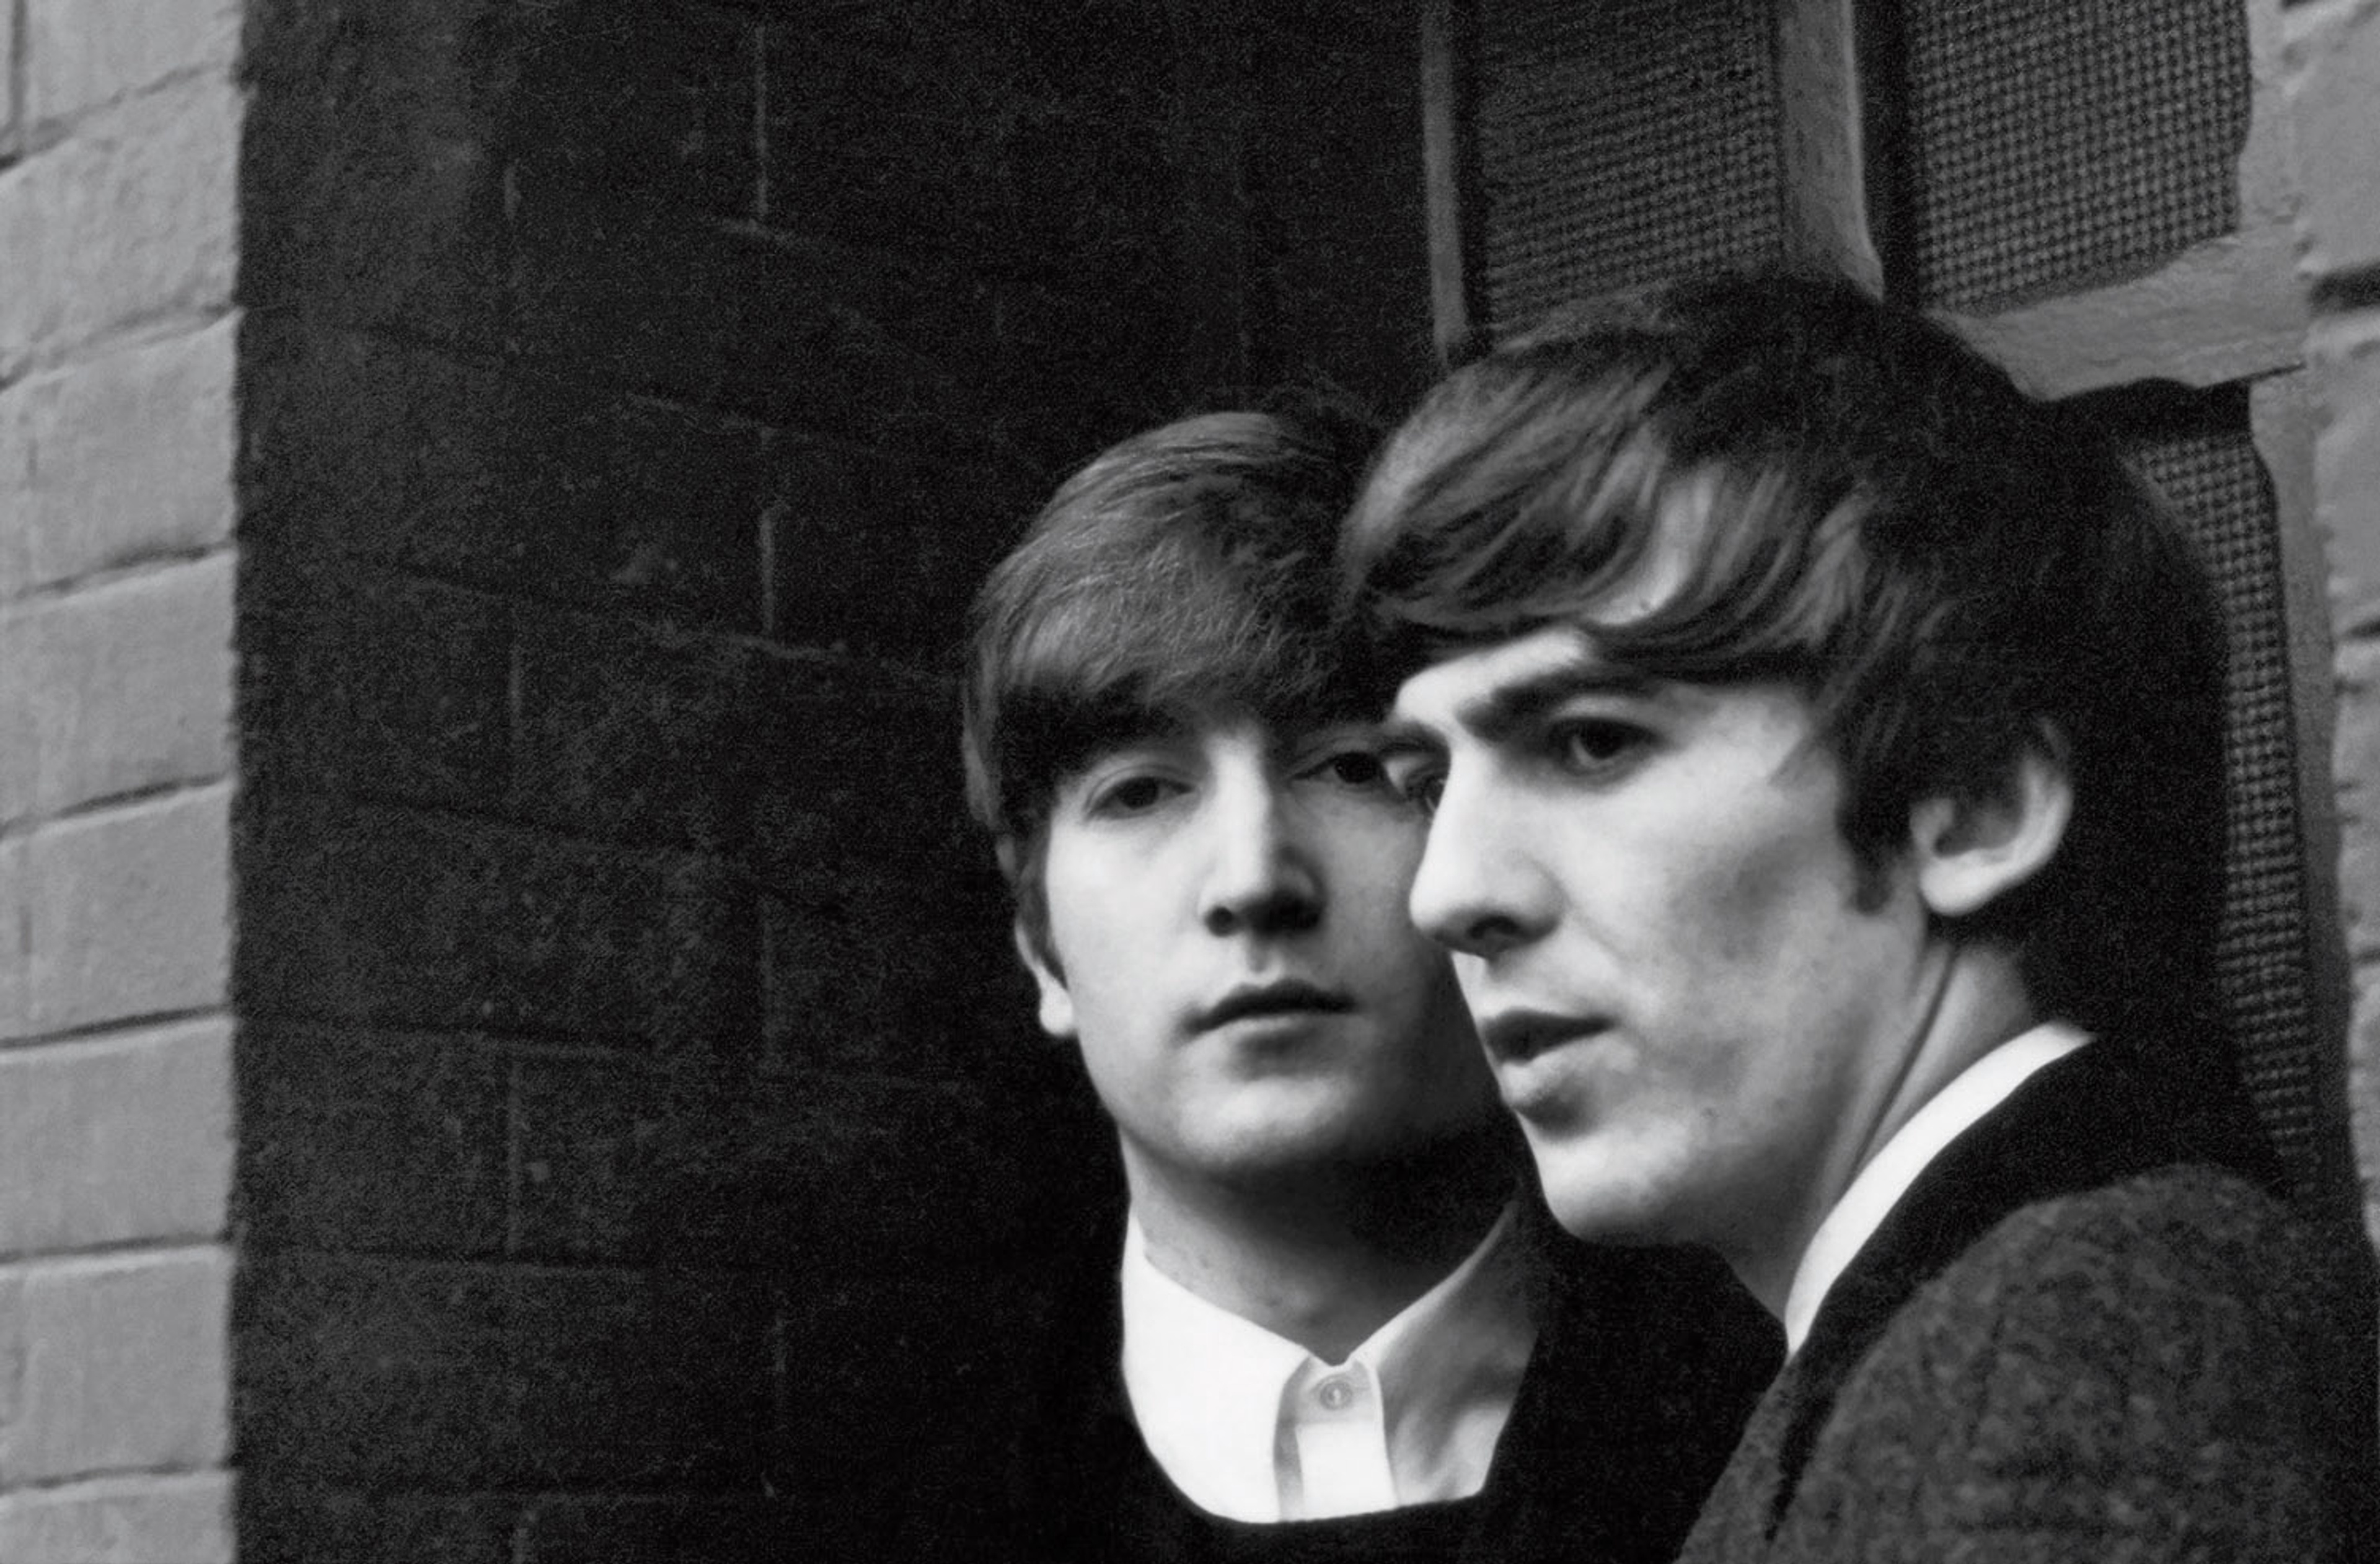 Black and white photograph of John Lennon and George Harrison in Paris